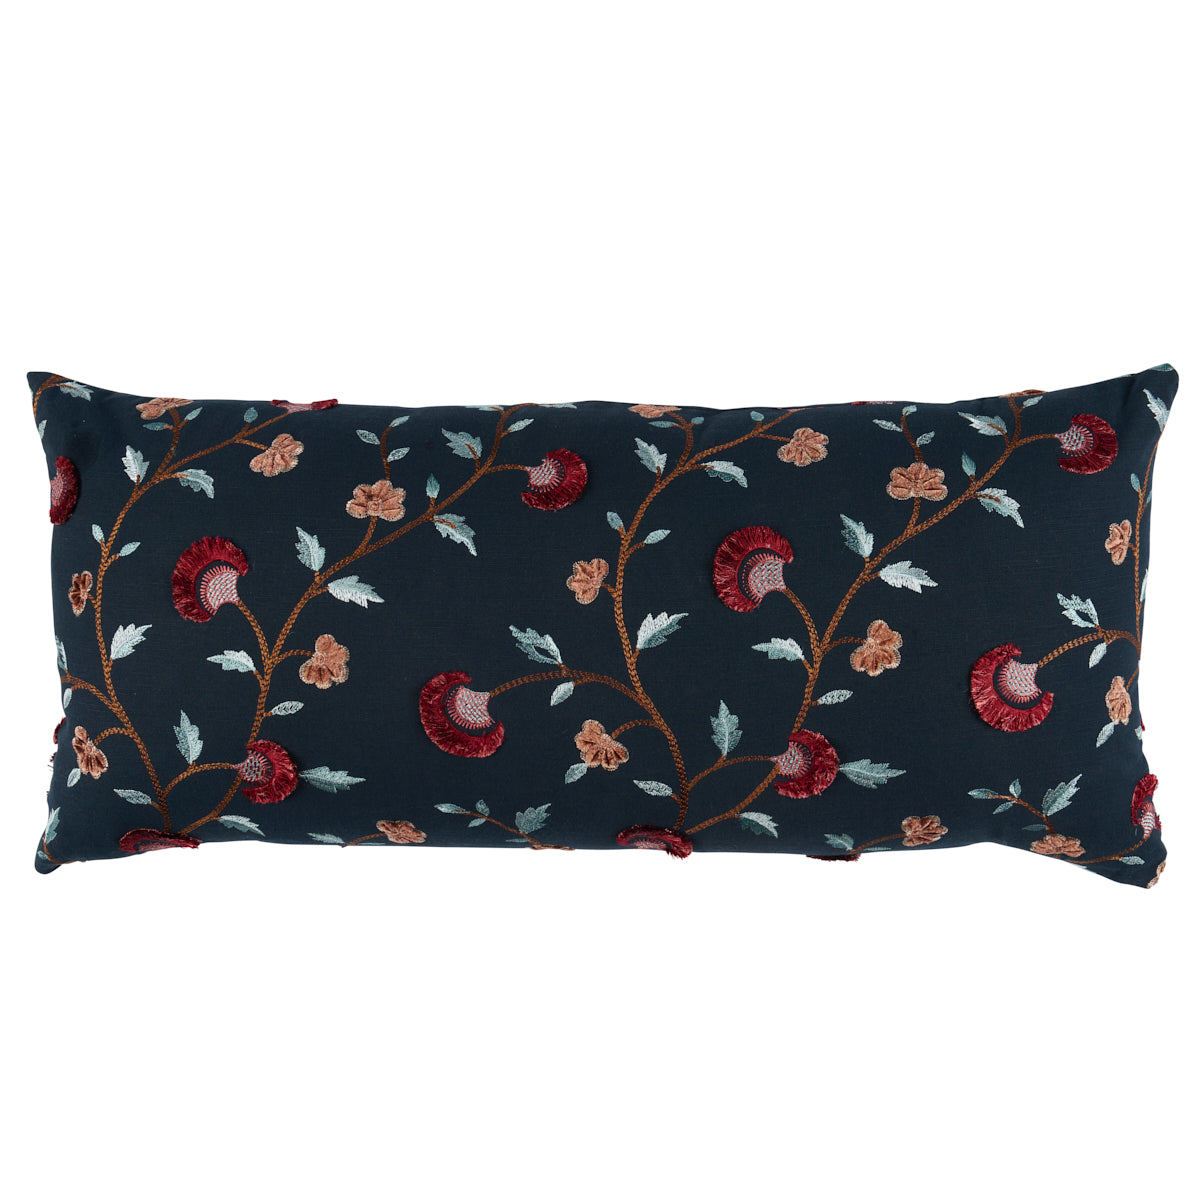 Purchase So8366230 | Iyla Embroidery Pillow, Midnight & Rouge - Schumacher Pillows